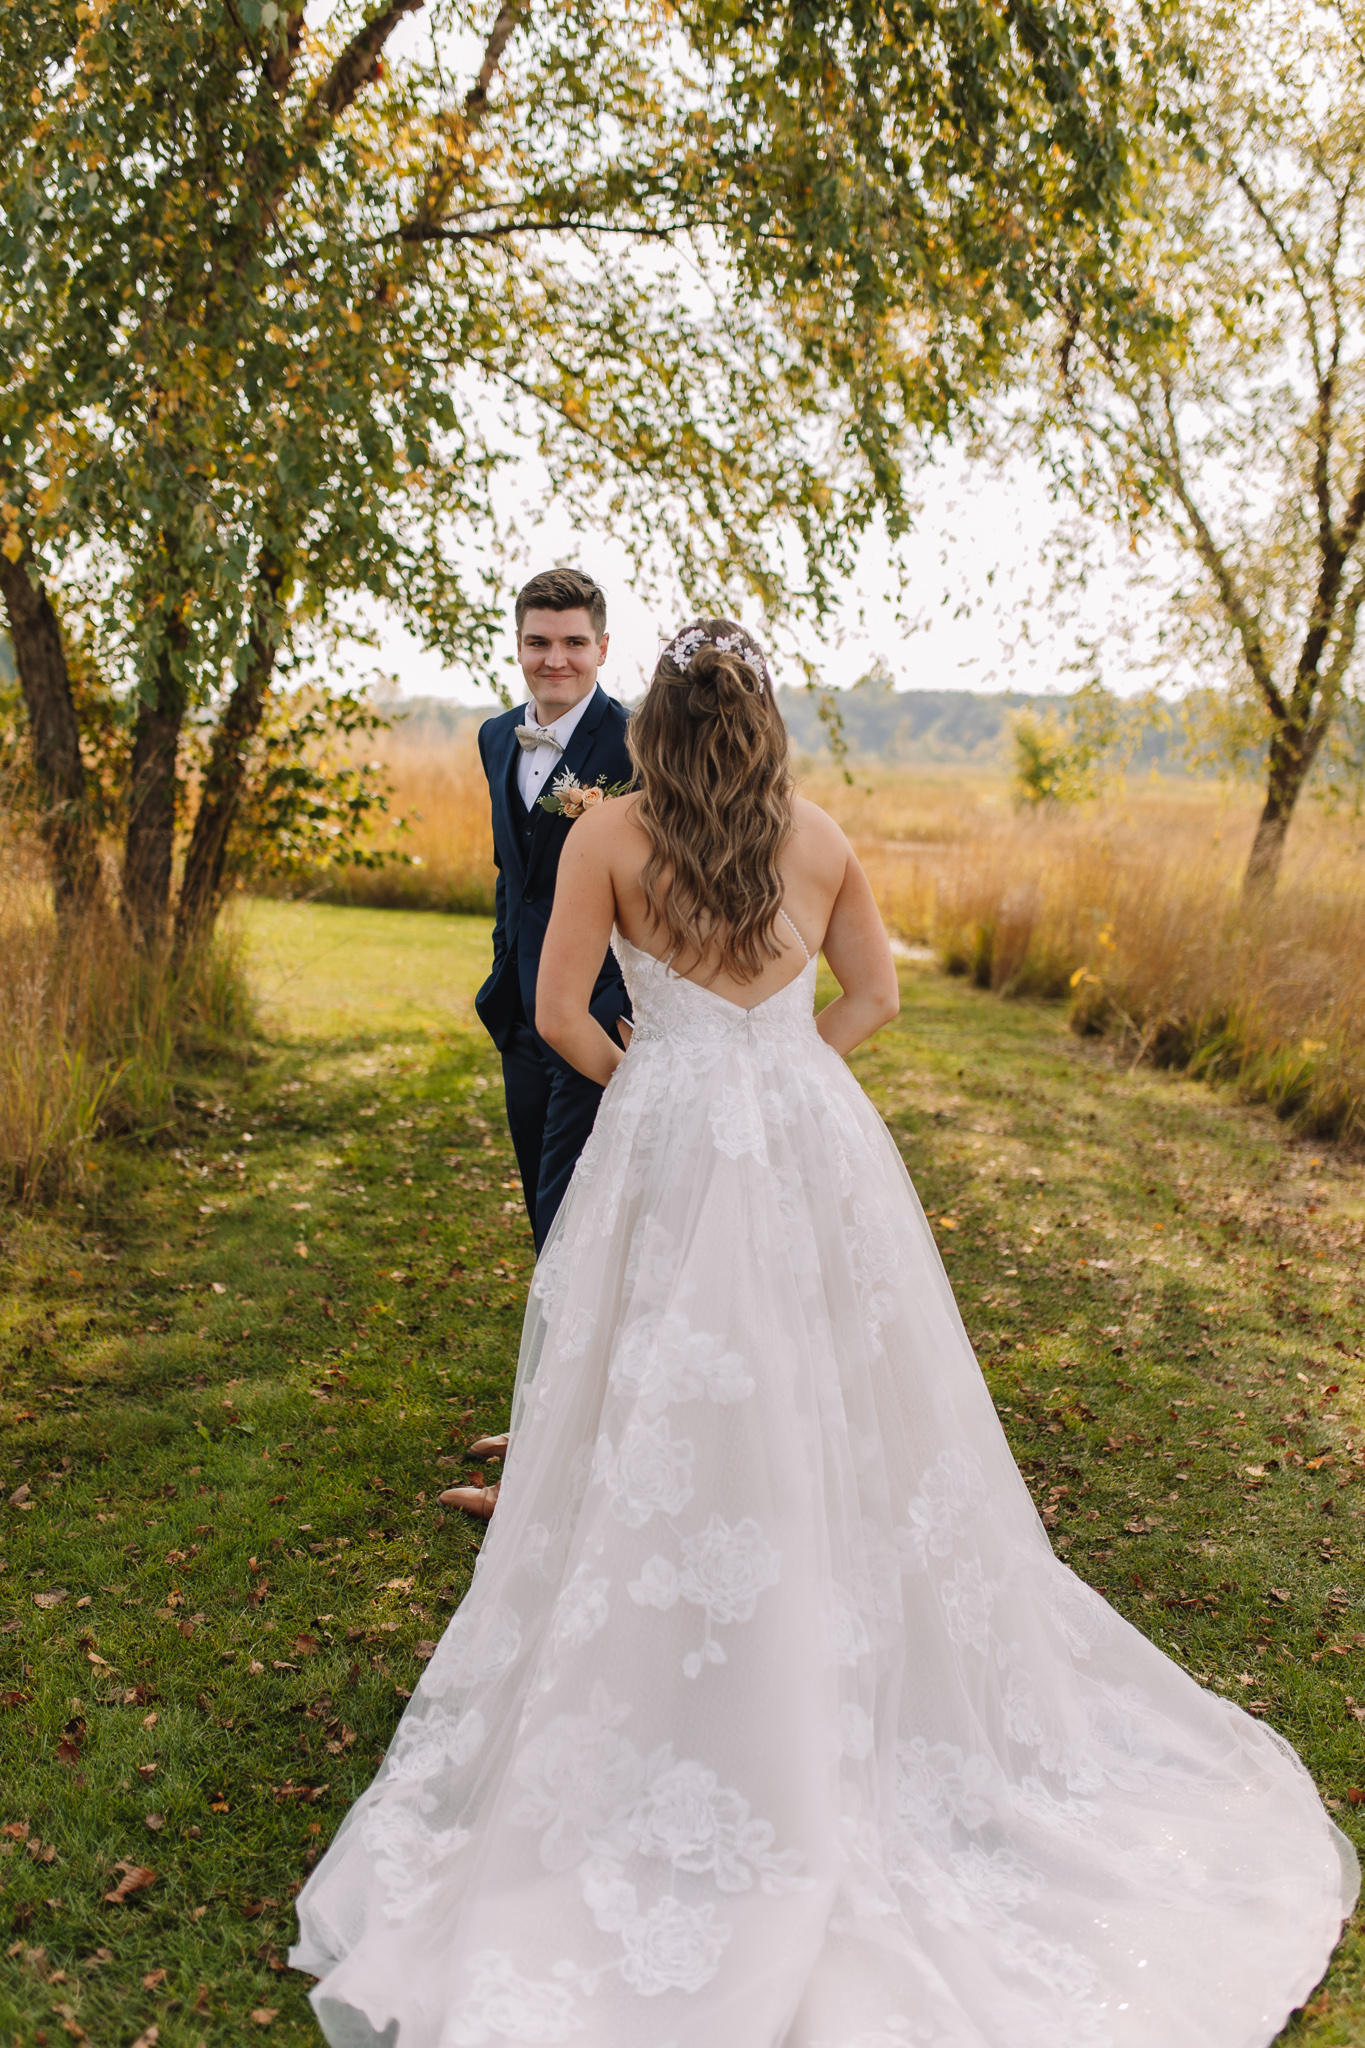 A bride in a white lace gown and a groom in a navy suit walking hand in hand in a grassy field, smiling.